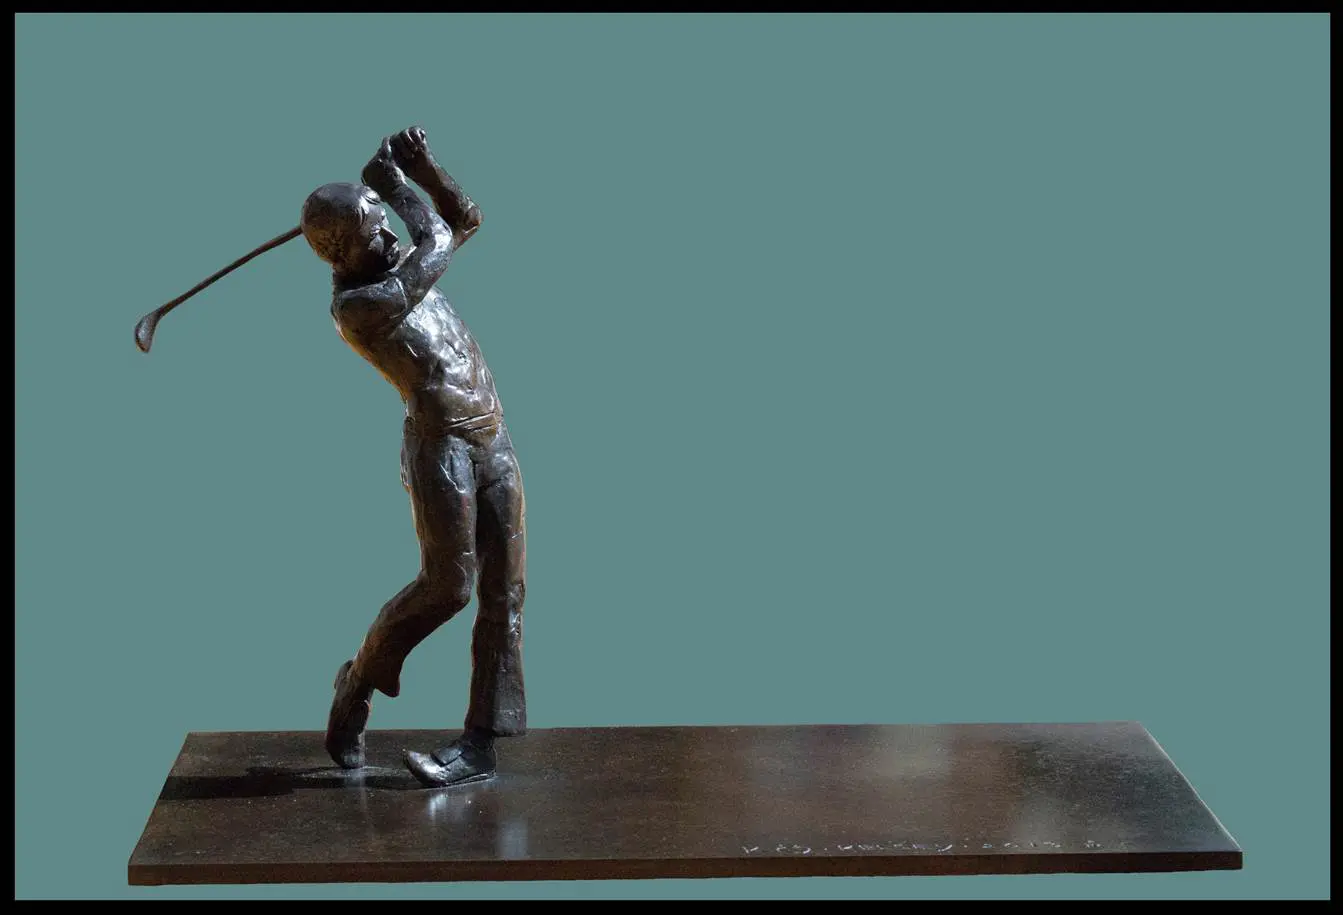 A metal sculpture of a man swinging at the golf ball.